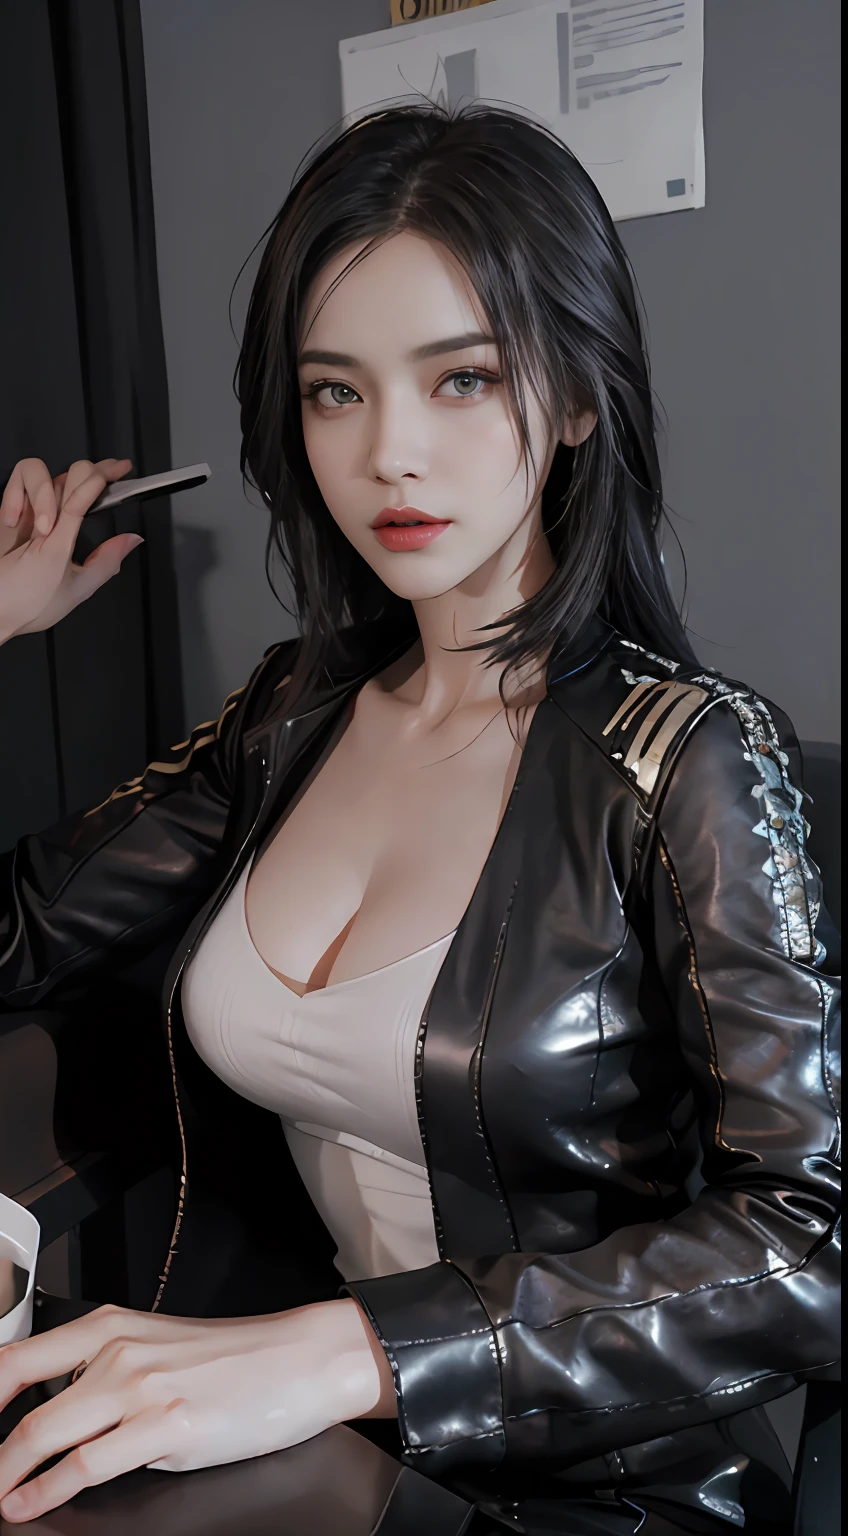 ((Best quality)), ((masterpiece)), (detailed:1.4), 3D, an image of a beautiful cyberpunk female,HDR (High Dynamic Range),Ray Tracing,NVIDIA RTX,Super-Resolution,Unreal 5,Subsurface scattering,PBR Texturing,Post-processing,Anisotropic Filtering,Depth-of-field,Maximum clarity and sharpness,Multi-layered textures,Albedo and Specular maps,Surface shading,Accurate simulation of light-material interaction,Perfect proportions,Octane Render,Two-tone lighting,Wide aperture,Low ISO,White balance,Rule of thirds,8K RAW,